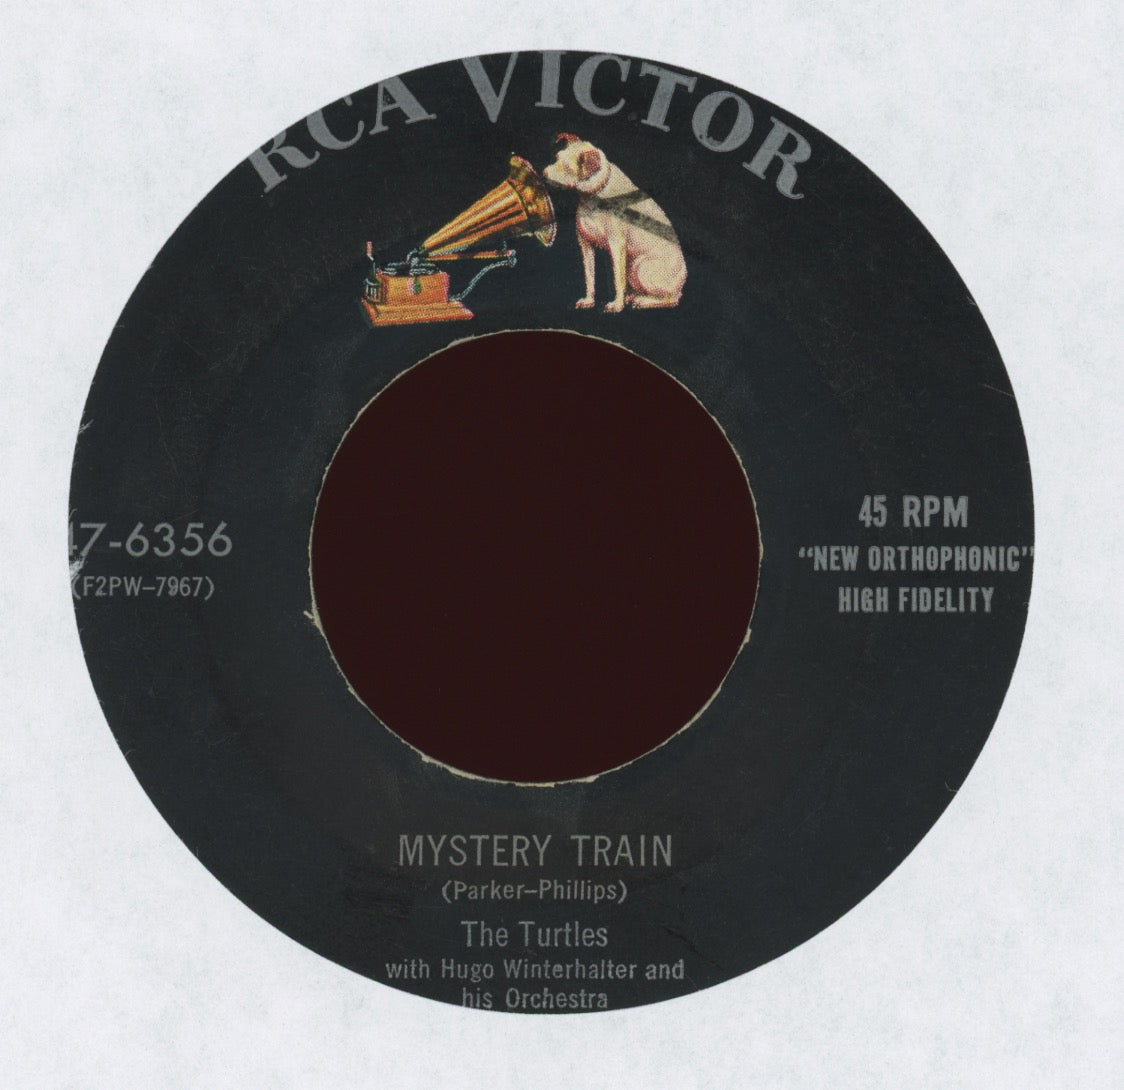 The Turtles - Mystery Train on RCA